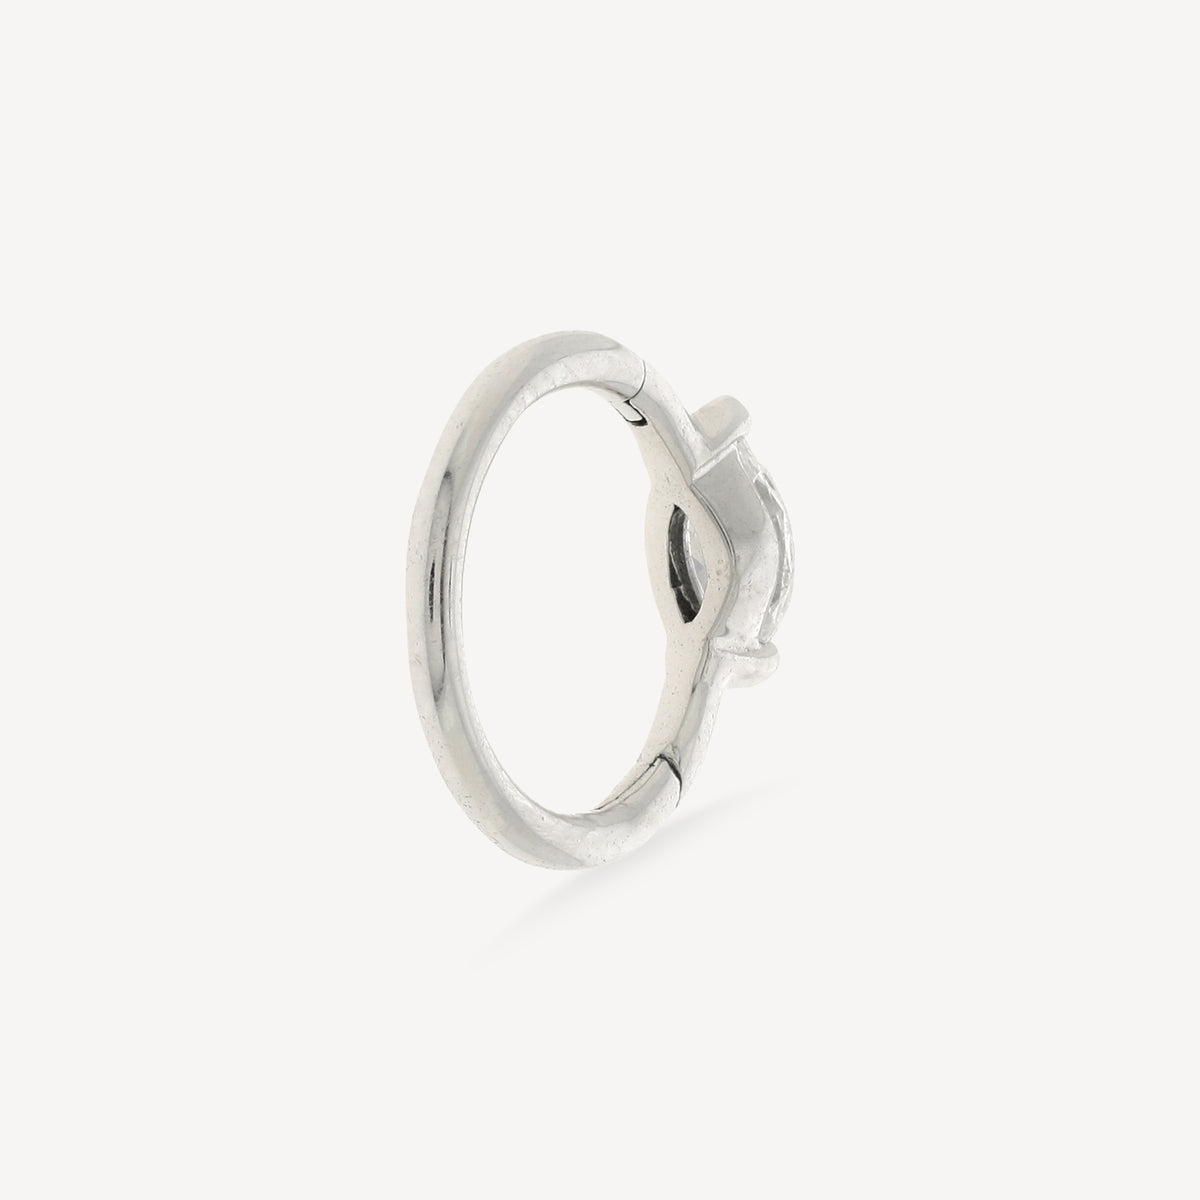 8mm White Gold Marquise 4.5x2mm Hoop